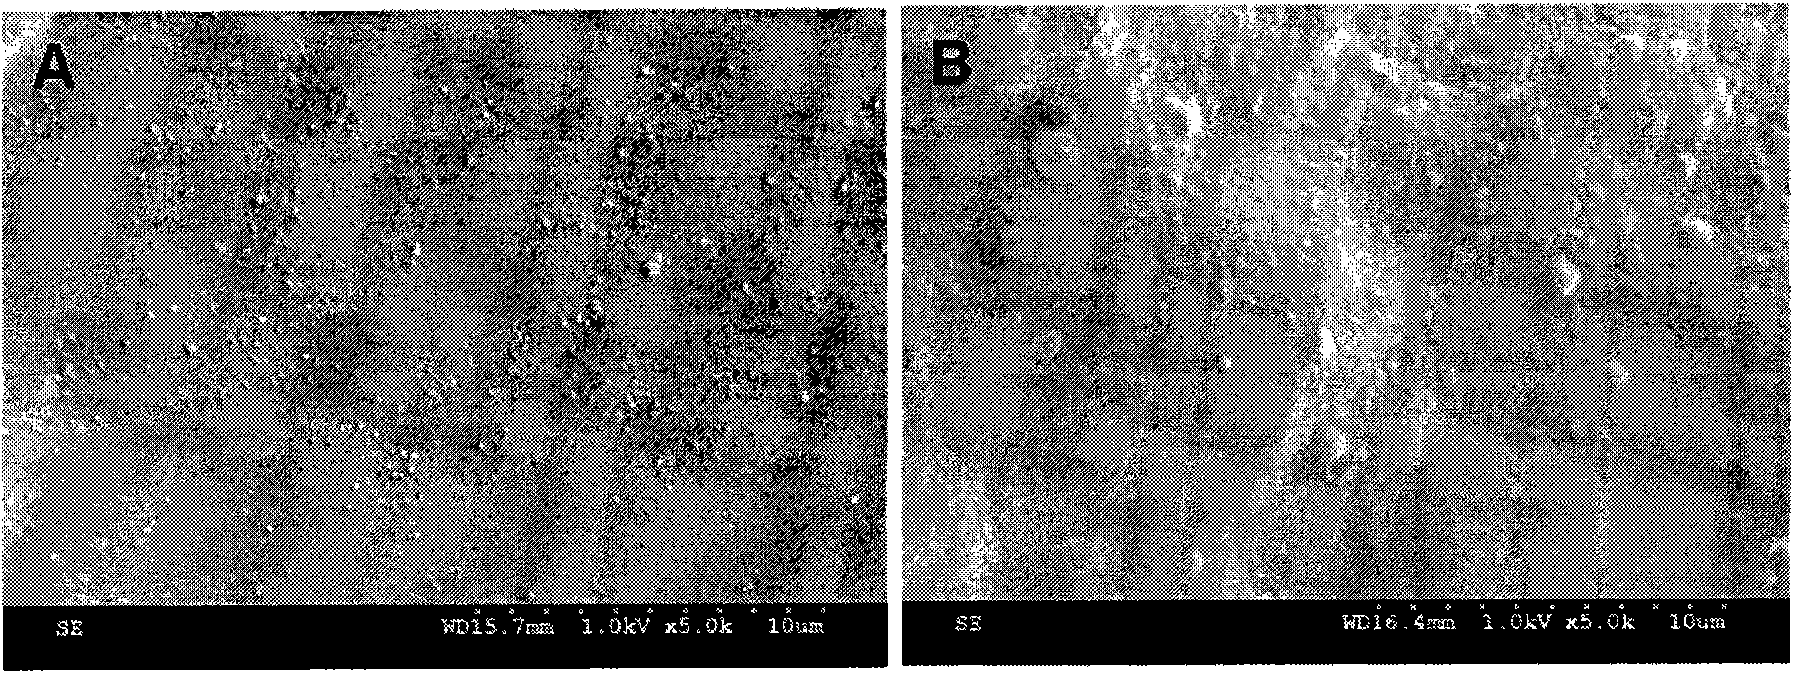 Chemically cross-linked hyaluronic acid hydrogel nanoparticles and the method for preparing thereof